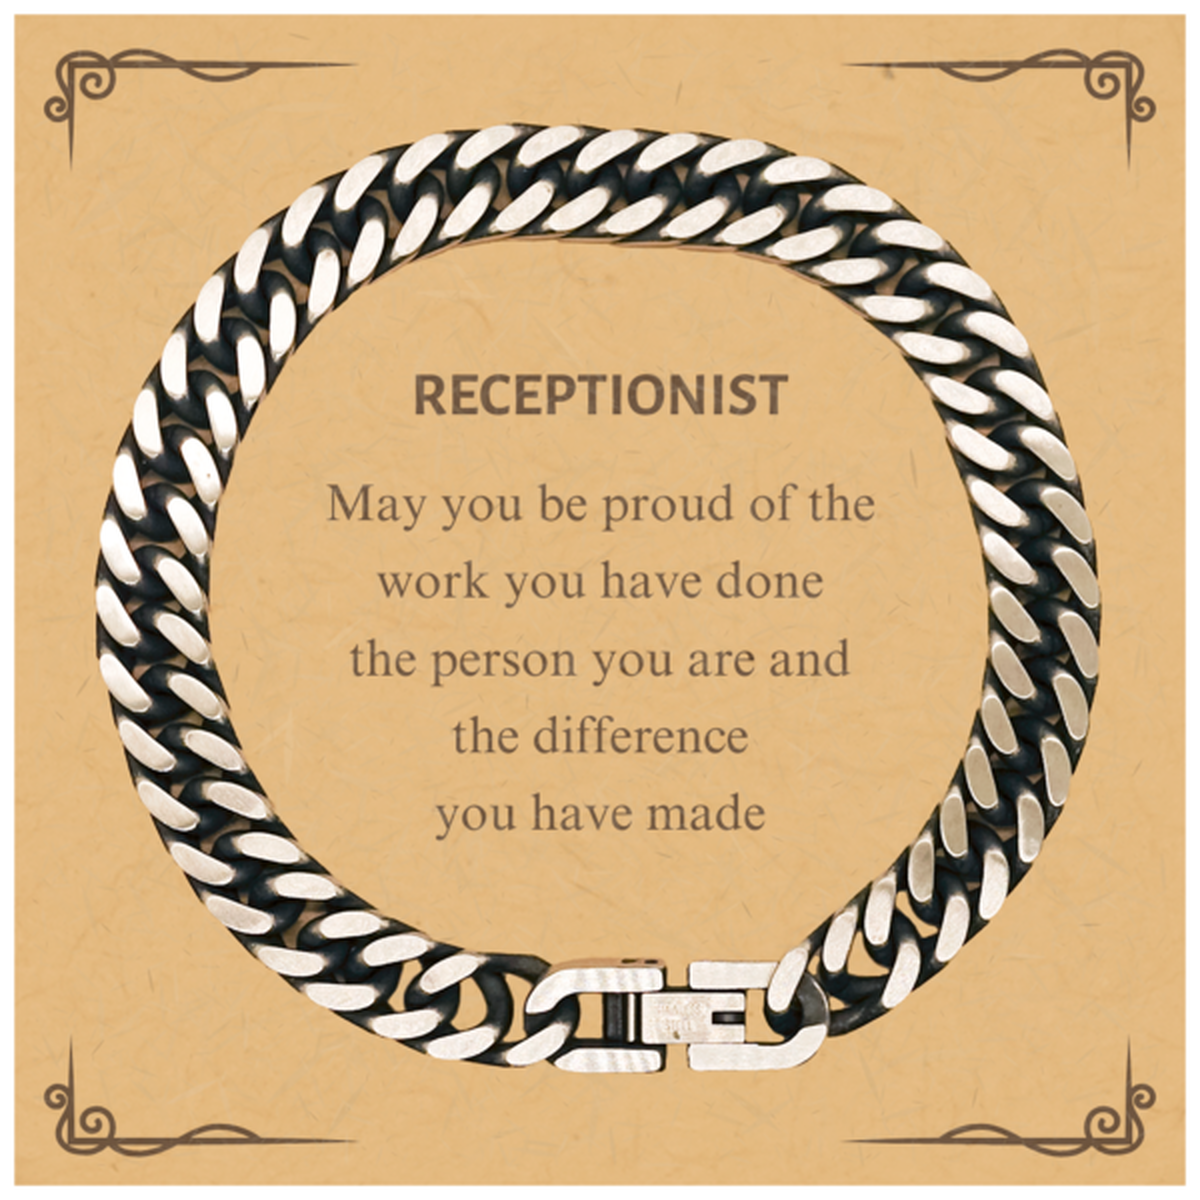 Receptionist May you be proud of the work you have done, Retirement Receptionist Cuban Link Chain Bracelet for Colleague Appreciation Gifts Amazing for Receptionist